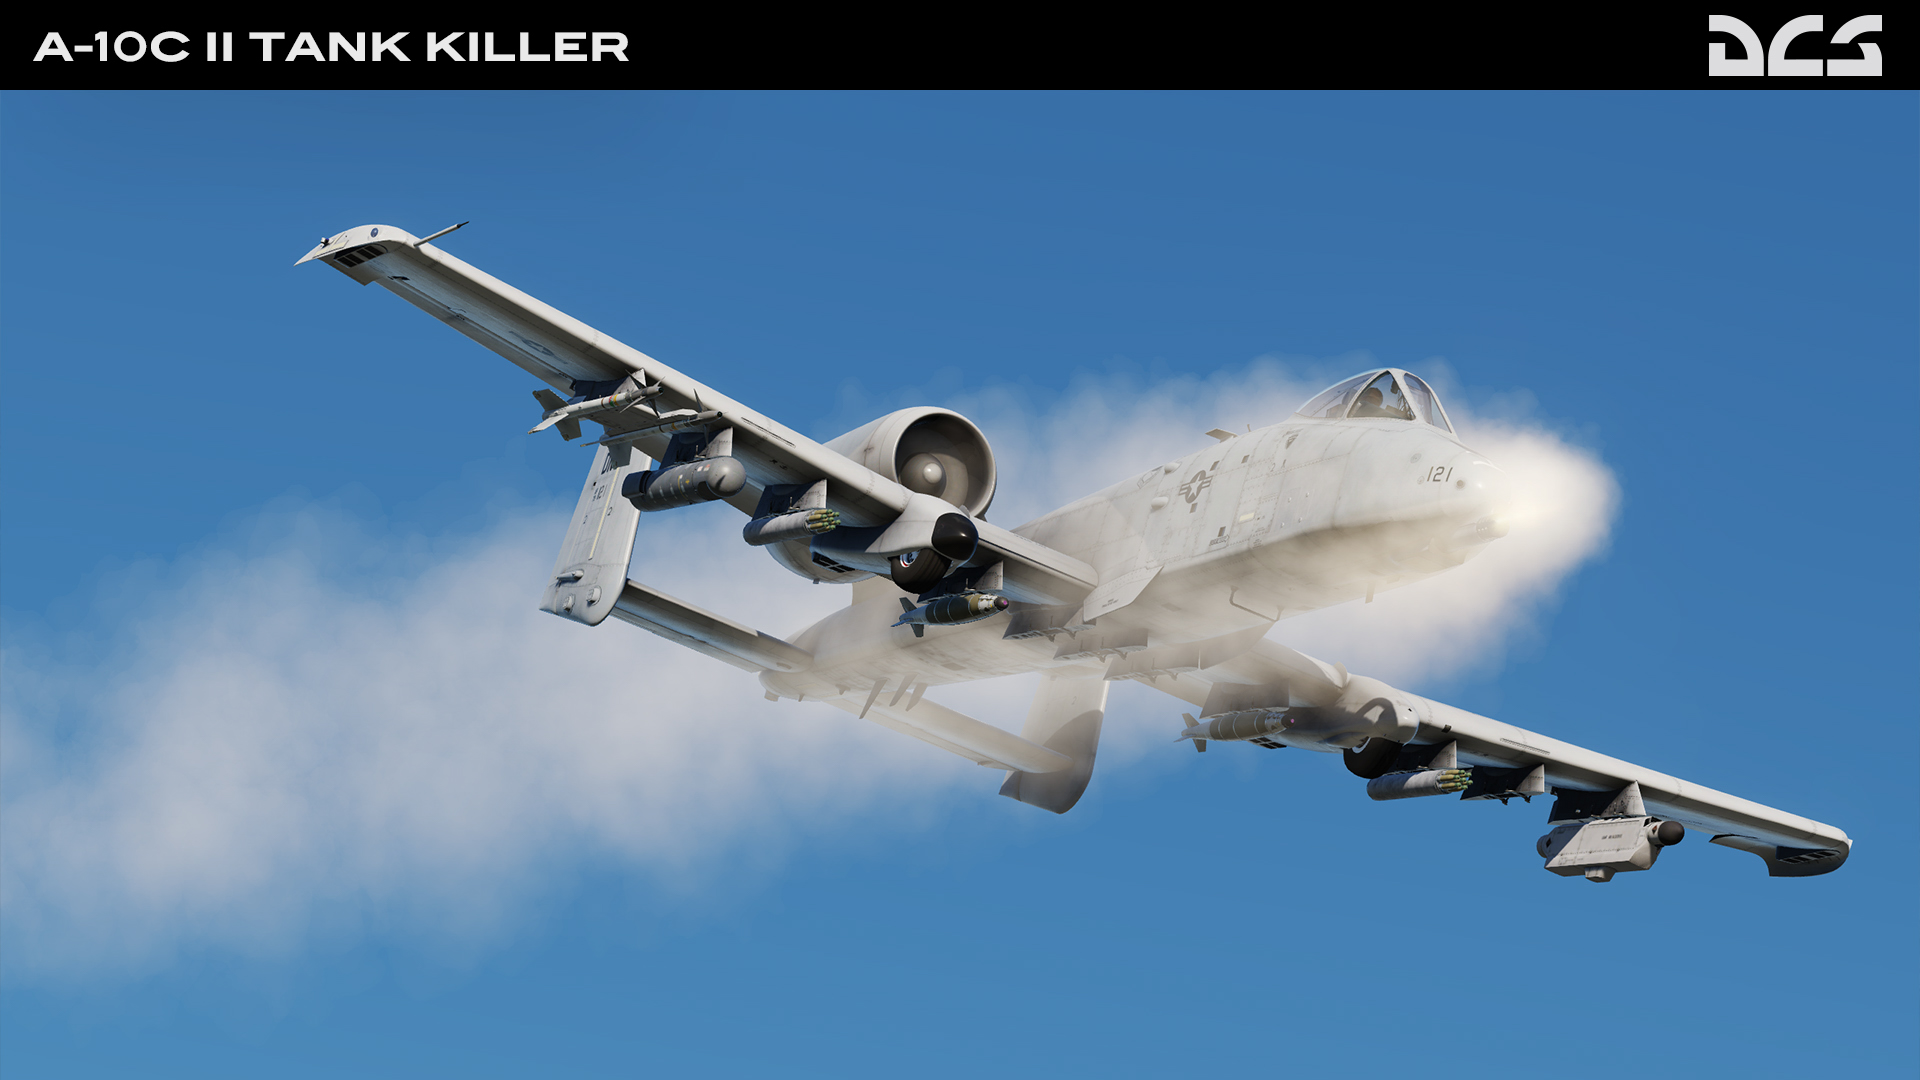 A-10C II cold and dark